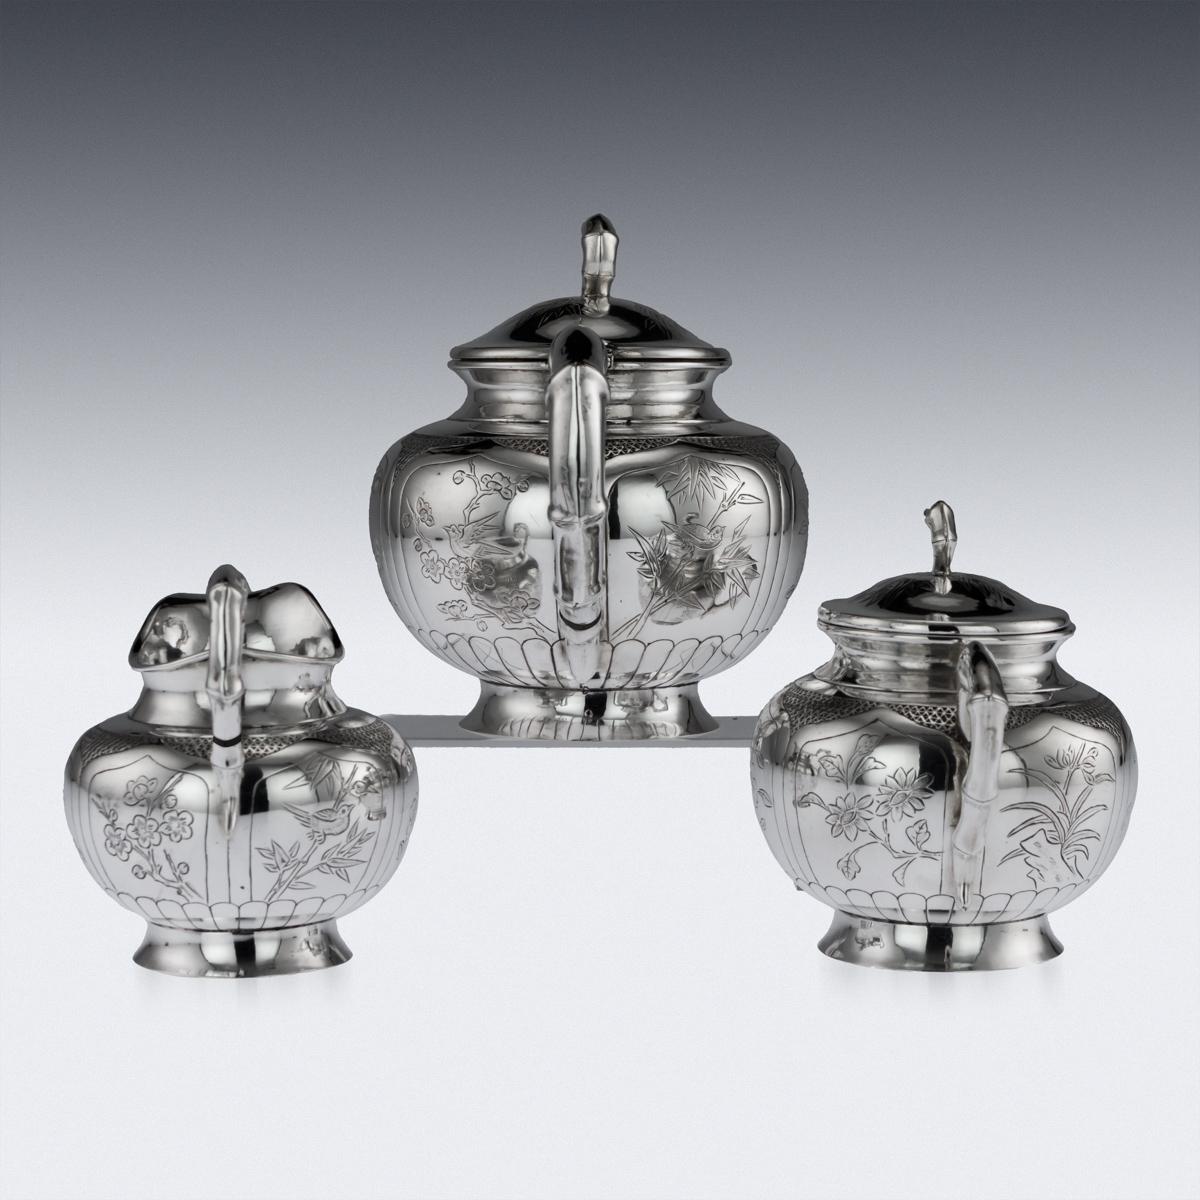 Antique early-20th Century rare Chinese solid silver impressive tea service on tray, comprising of a teapot, covered sugar bowl, milk jug and tray, each body is hand engraved with exotic birds within stylised cartooches, the hollow handles and spout